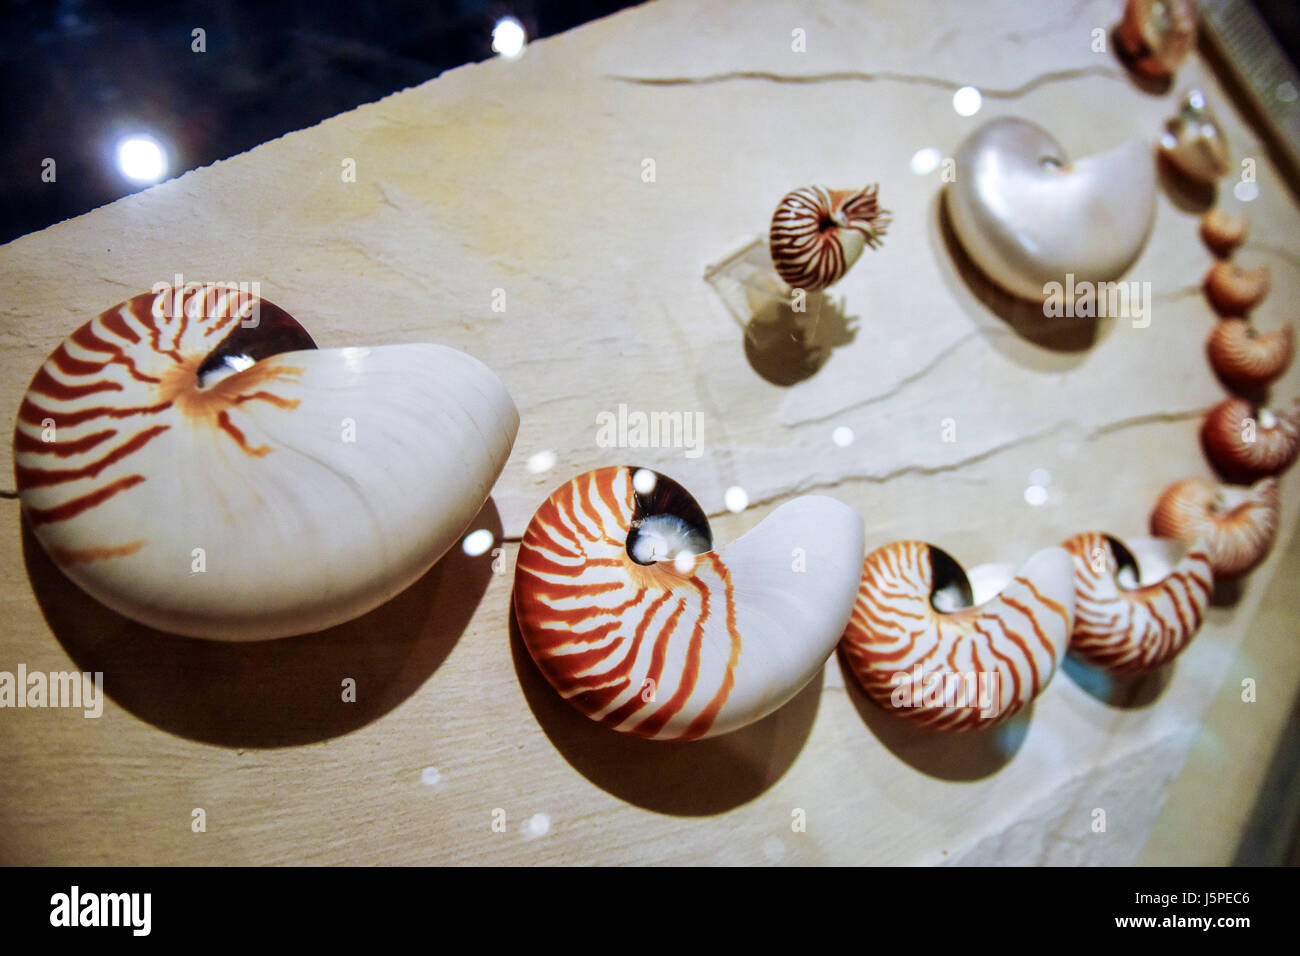 Bangkok, Thailand. 18th May, 2017. Nautilus shells are displayed at the Bangkok Seashell Museum in Bangkok, Thailand, May 18, 2017. Embracing a collection of over 3,000 specimens of 600 species, the Bangkok Seashell Museum not only enchants its visitors with a kaleidoscope of natural shapes and colours, but also serves as a knowledge source for those interested in the evolution and classification of shelled animals. Credit: Li Mangmang/Xinhua/Alamy Live News Stock Photo